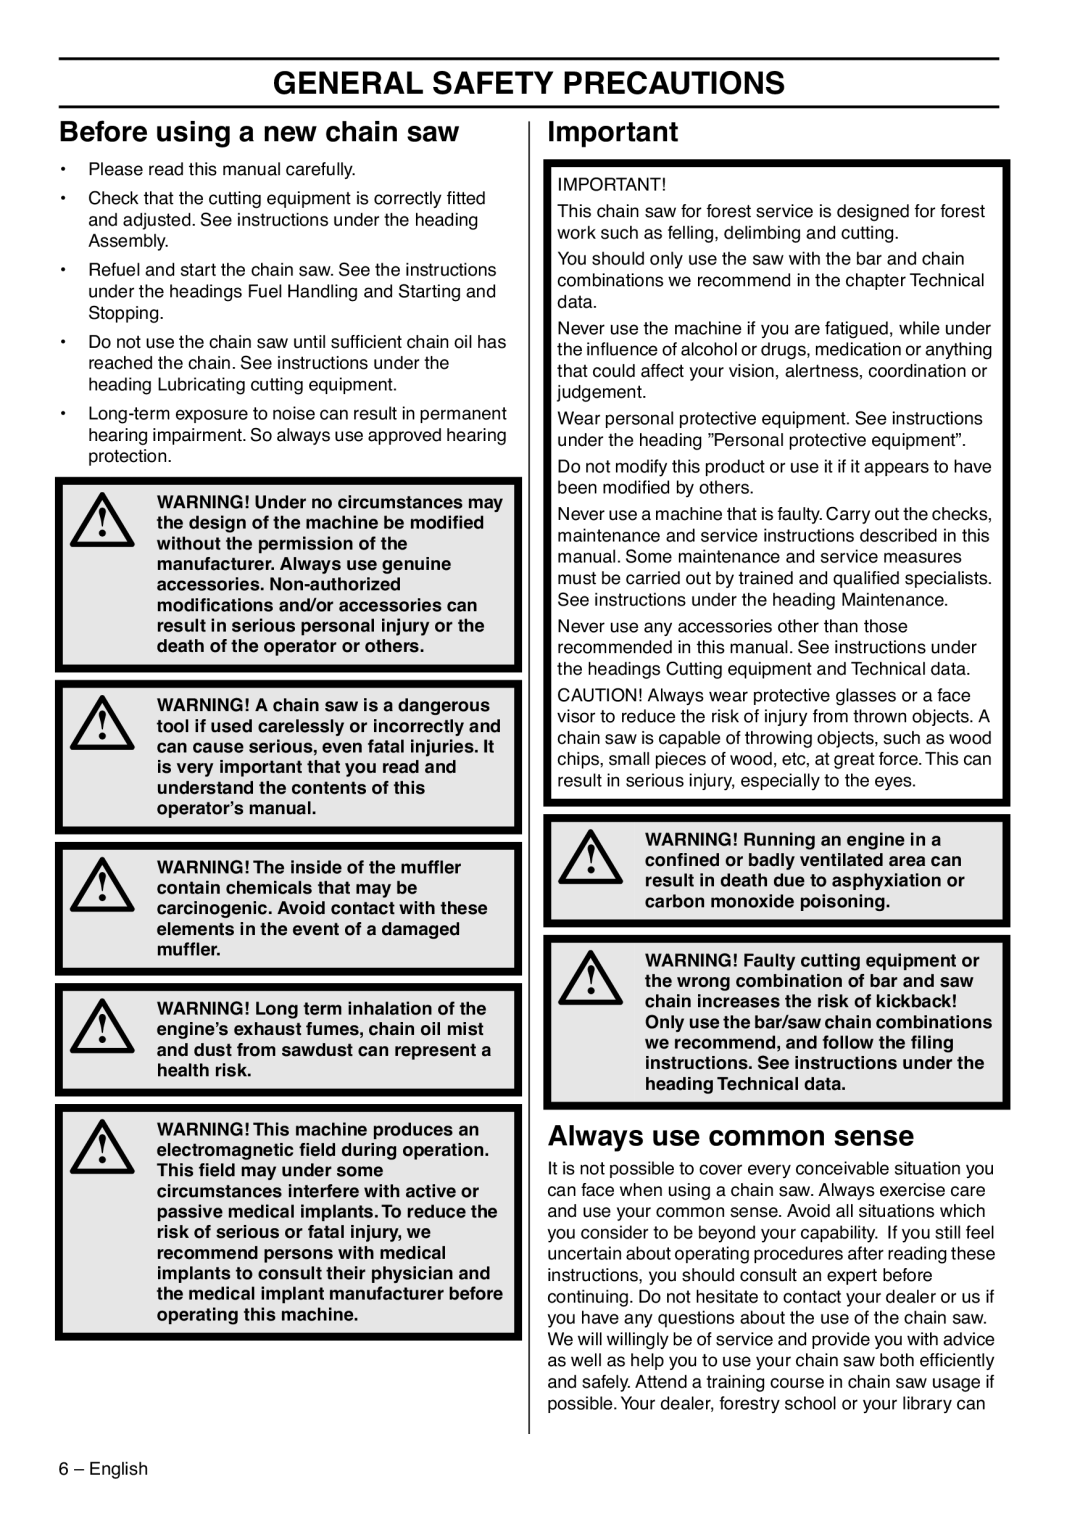 Husqvarna 1153183-26 manual General Safety Precautions, Before using a new chain saw, Always use common sense 